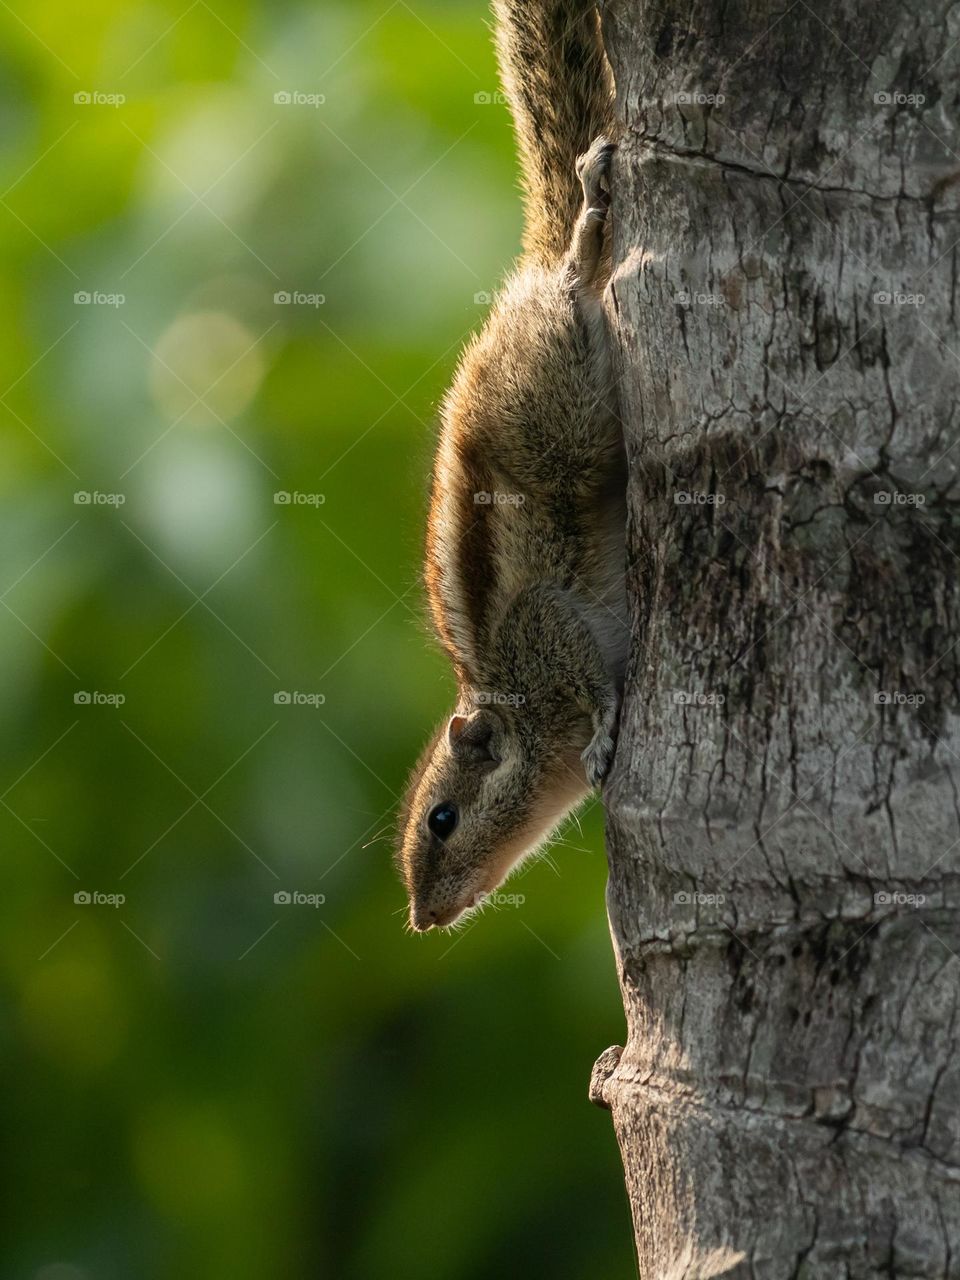 The Northern Palm Squirrel